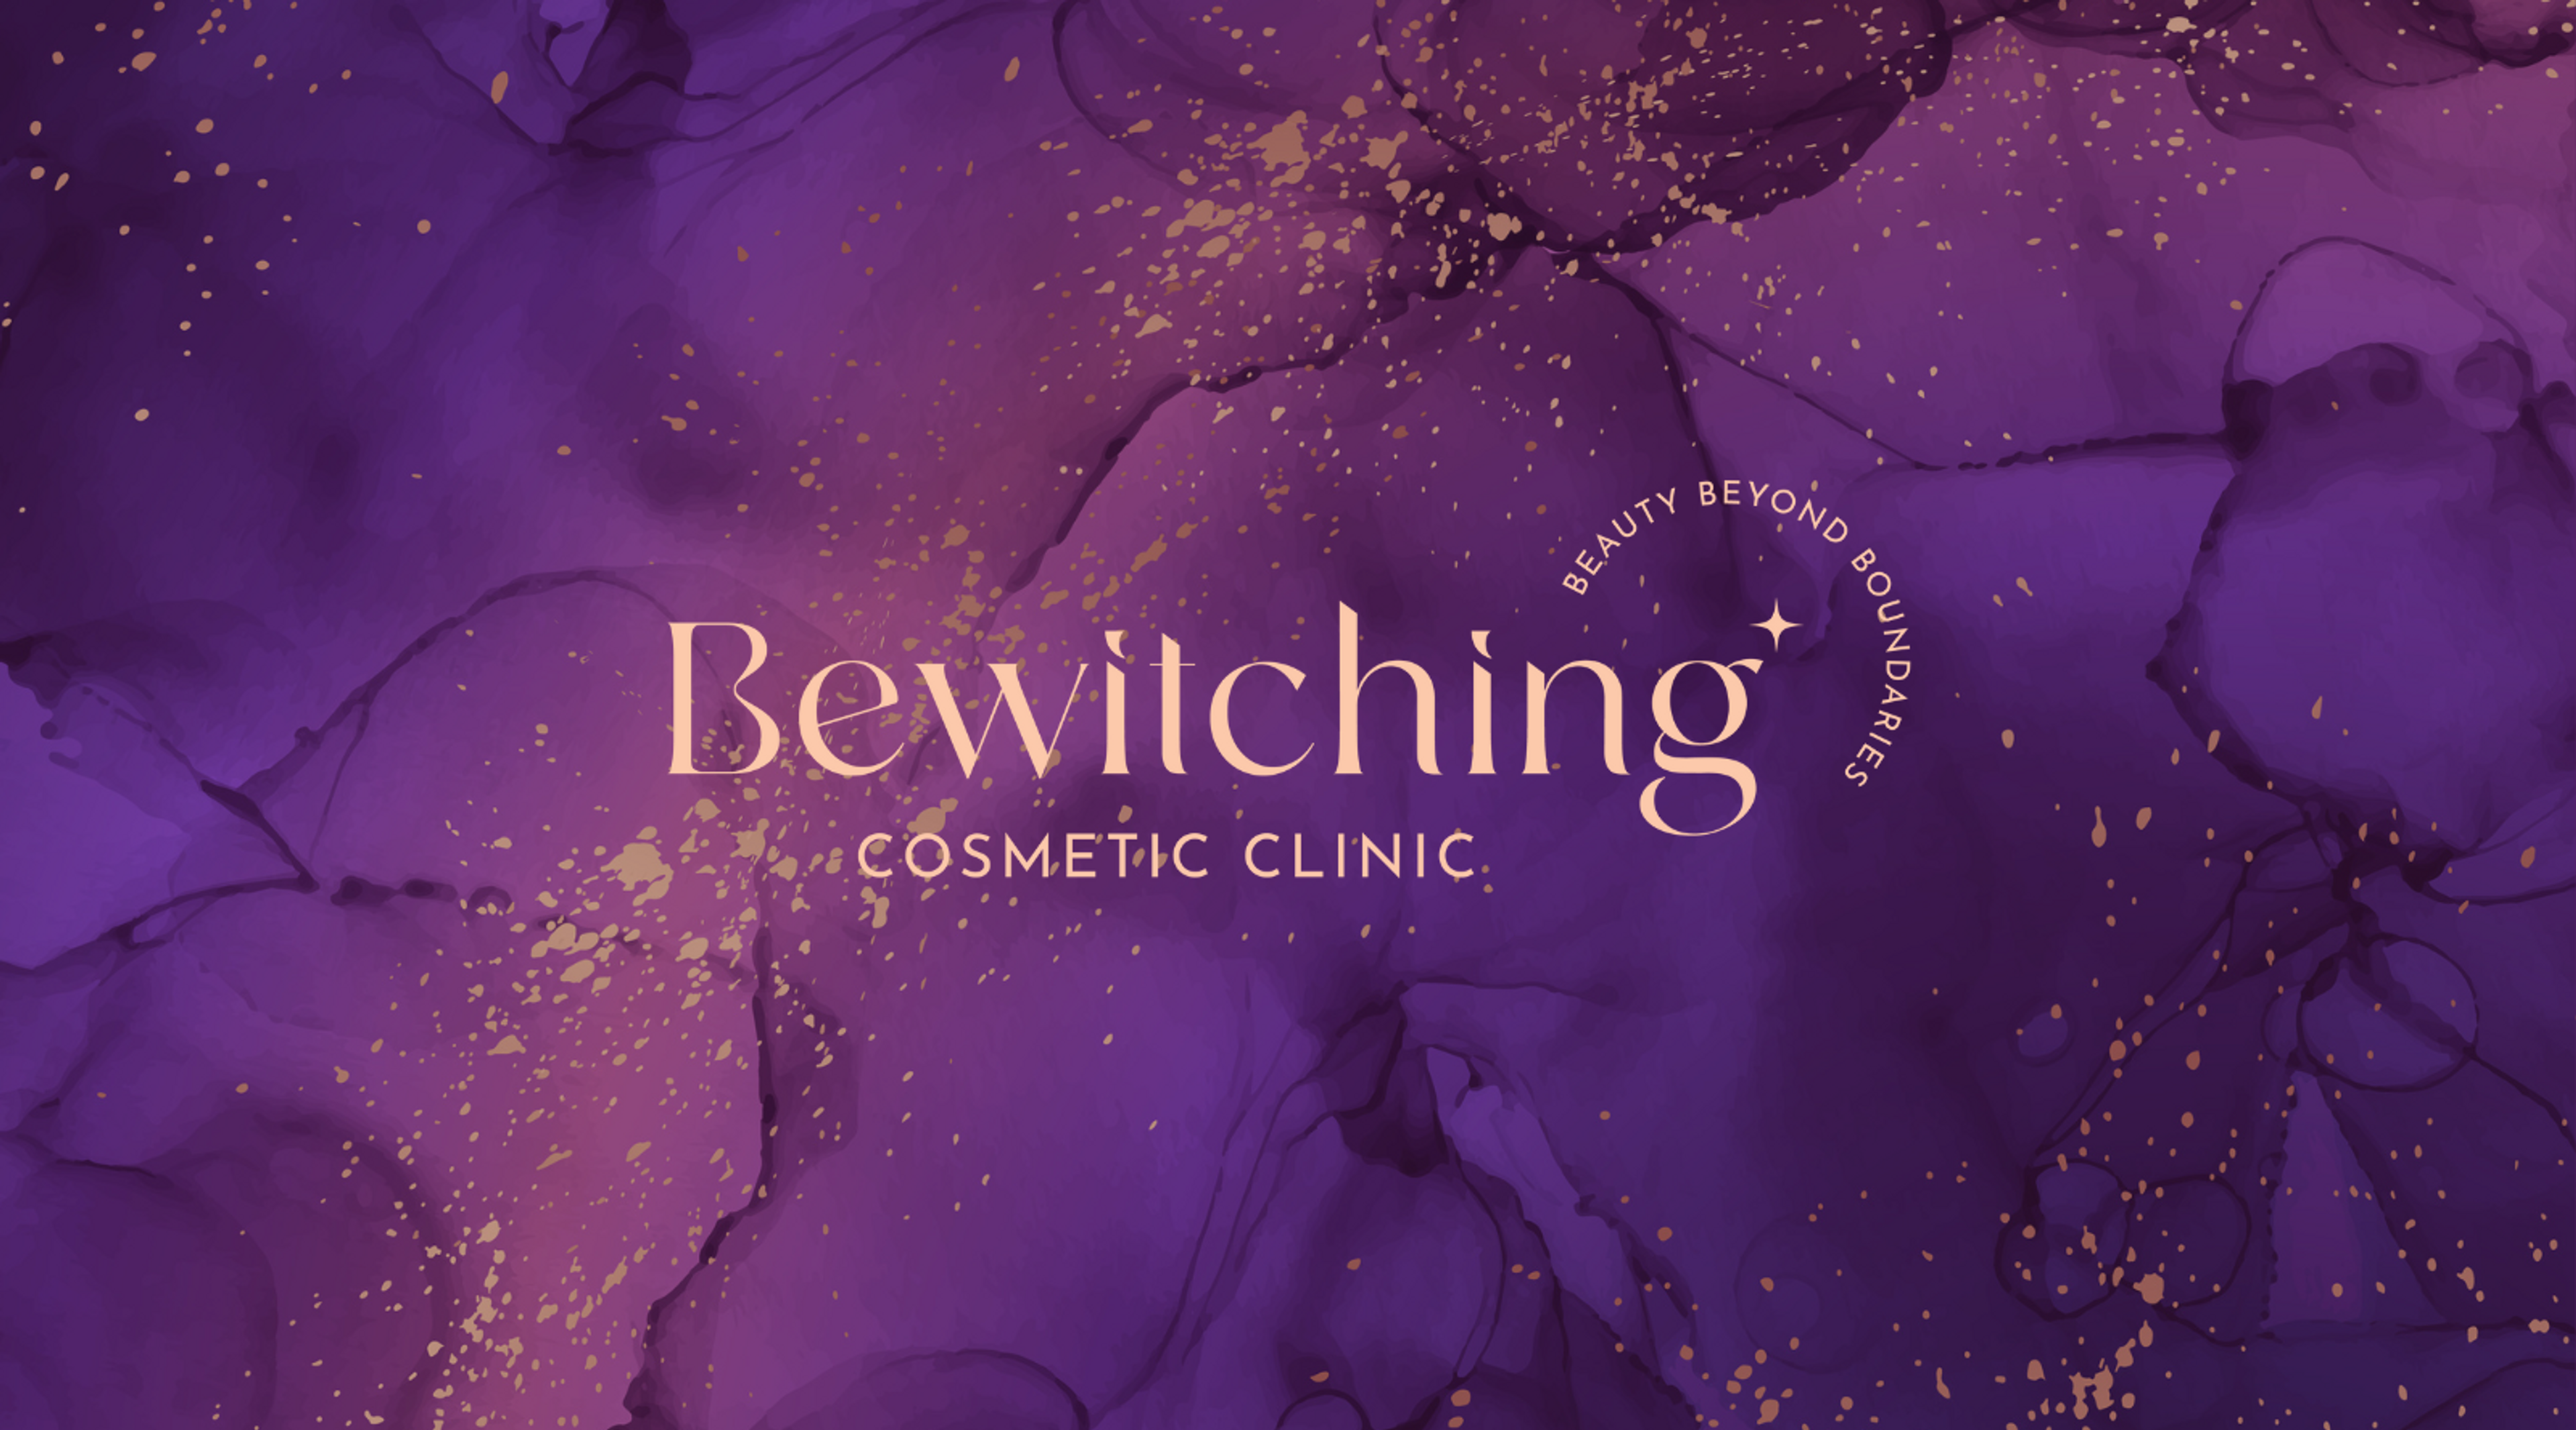 Bewitching logo with background